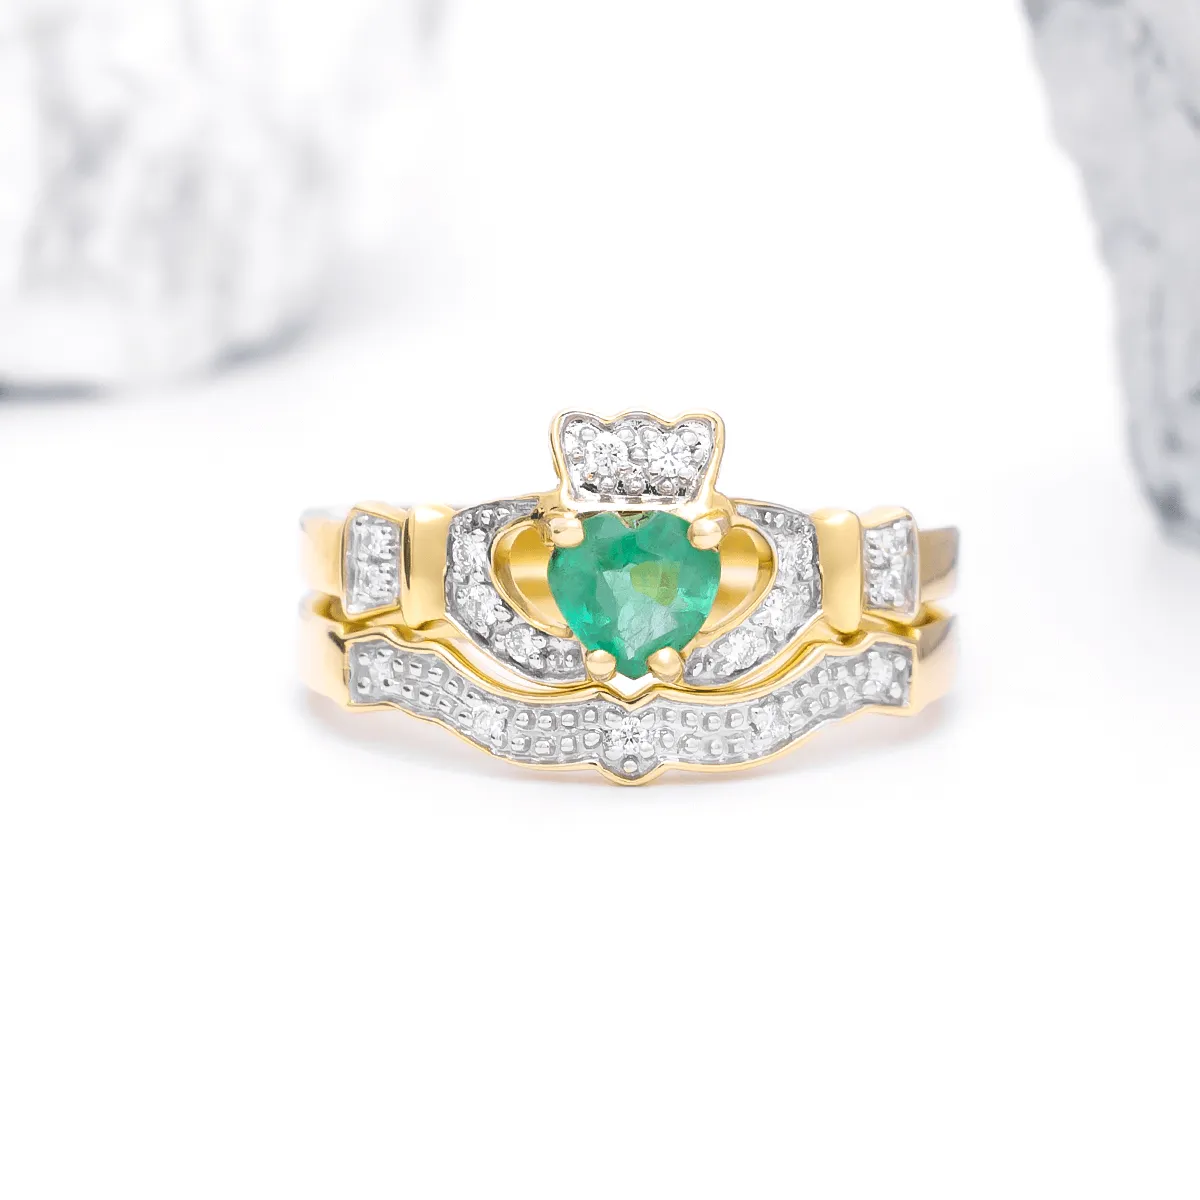 Stunning Gold Claddagh Engagement Ring Set Inlaid with Emerald and Dia...